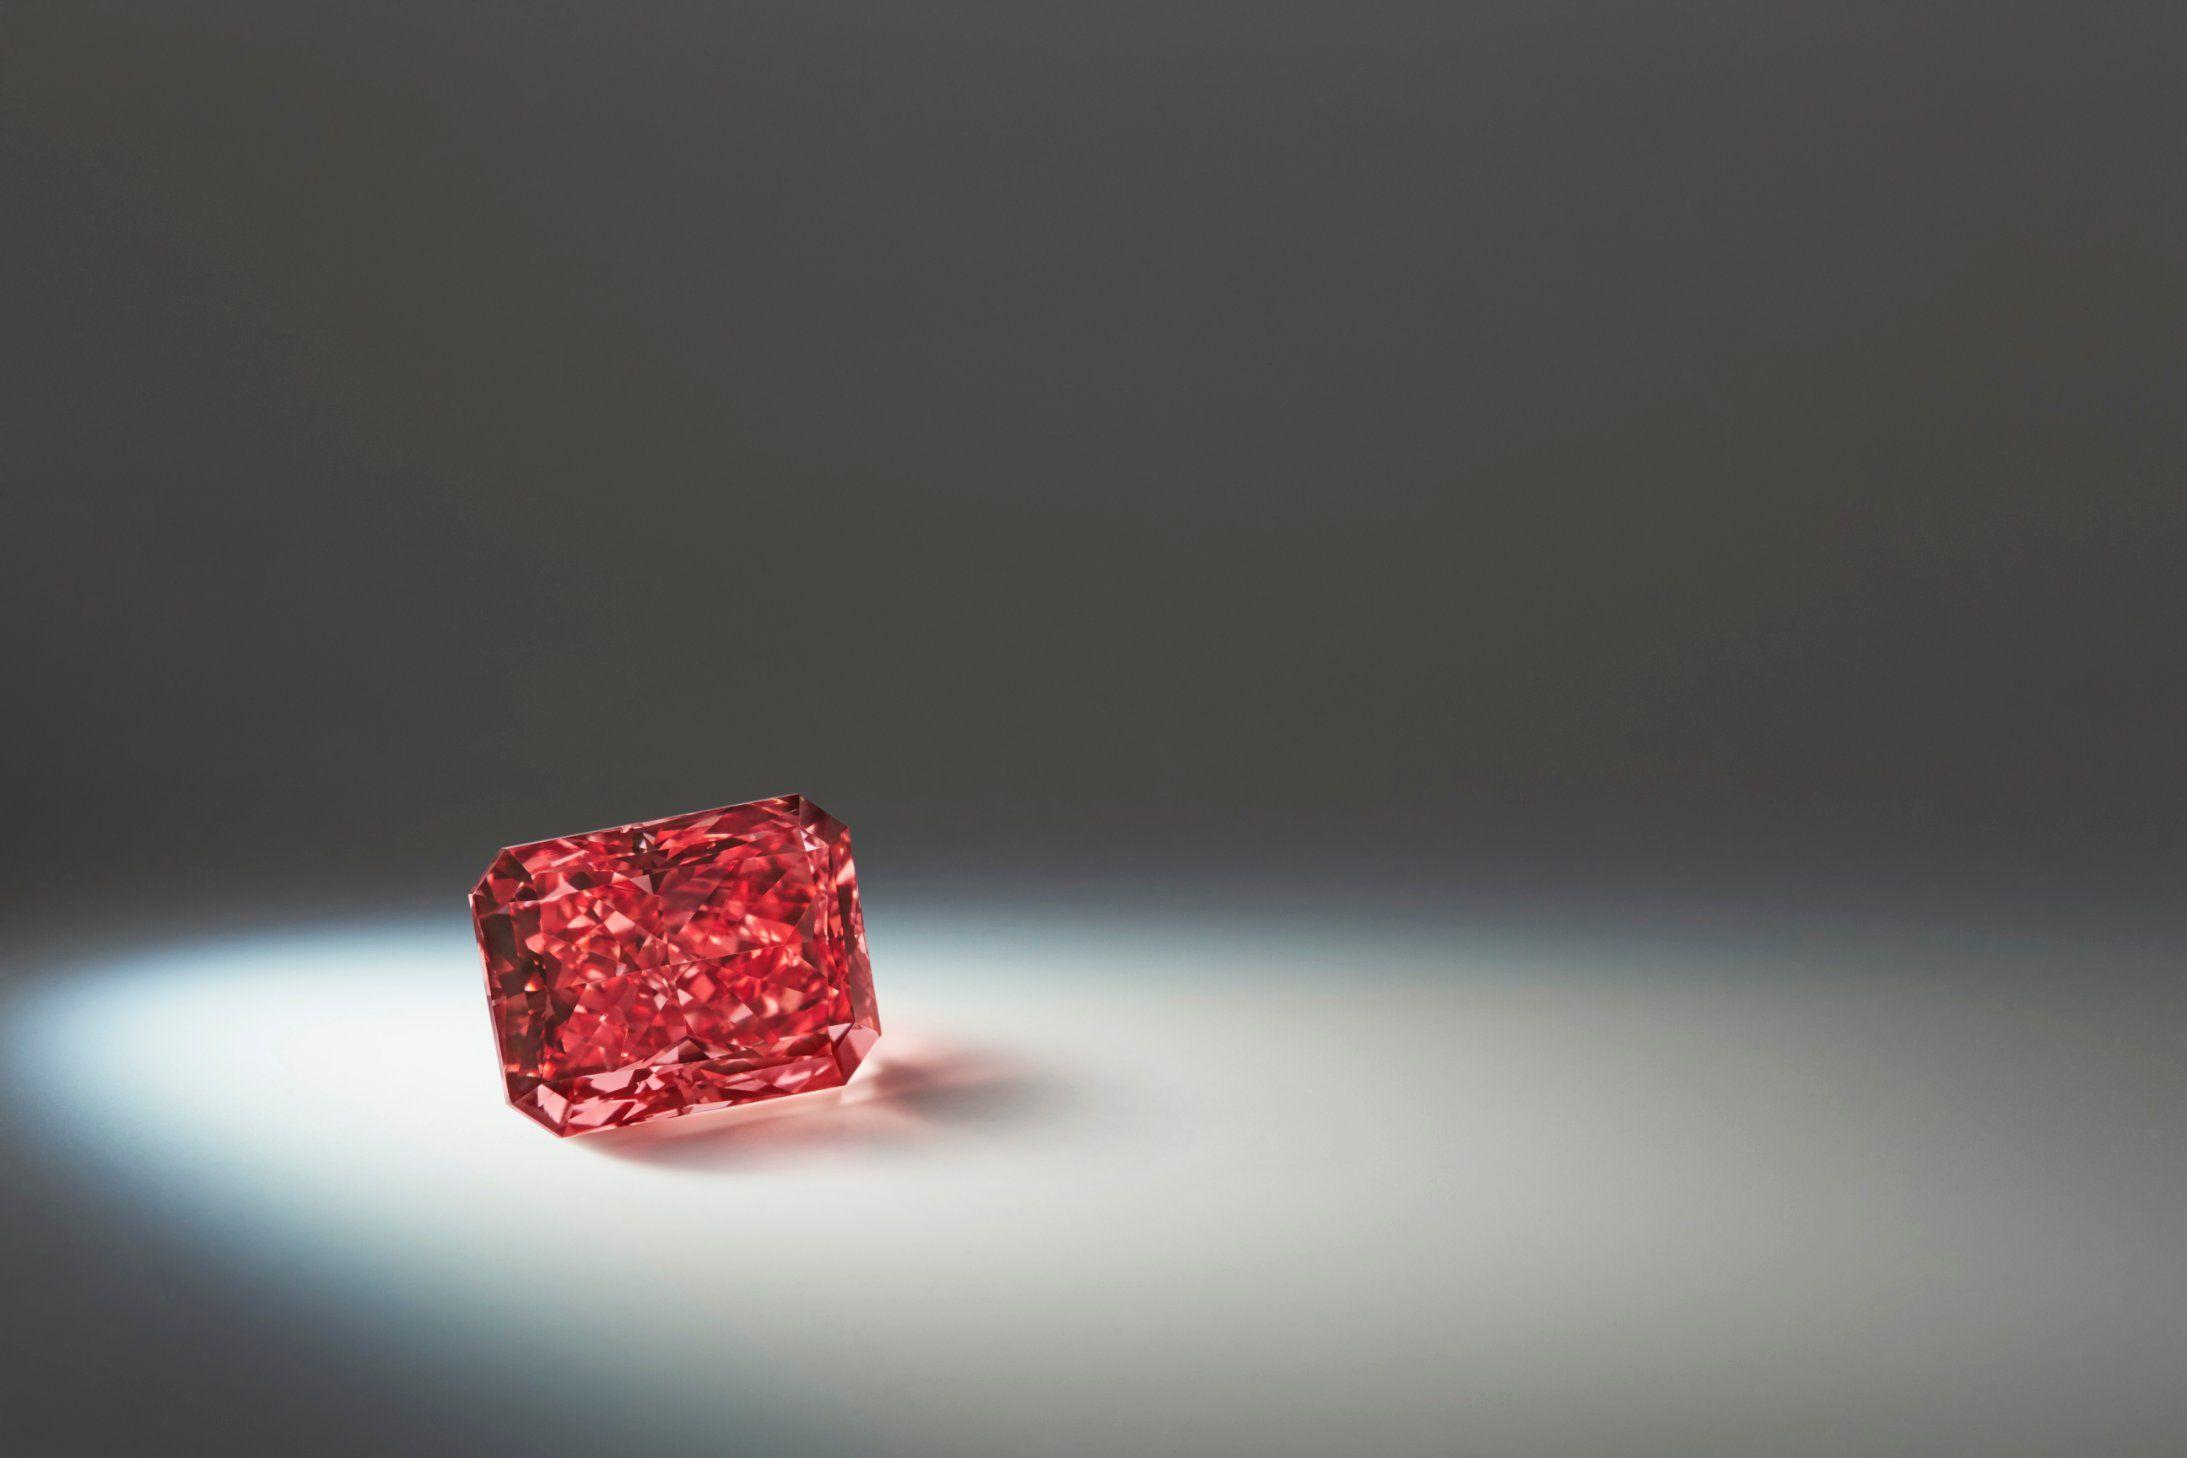 Two Red Diamonds Logo - Rare Fancy Red diamond could sell for millions